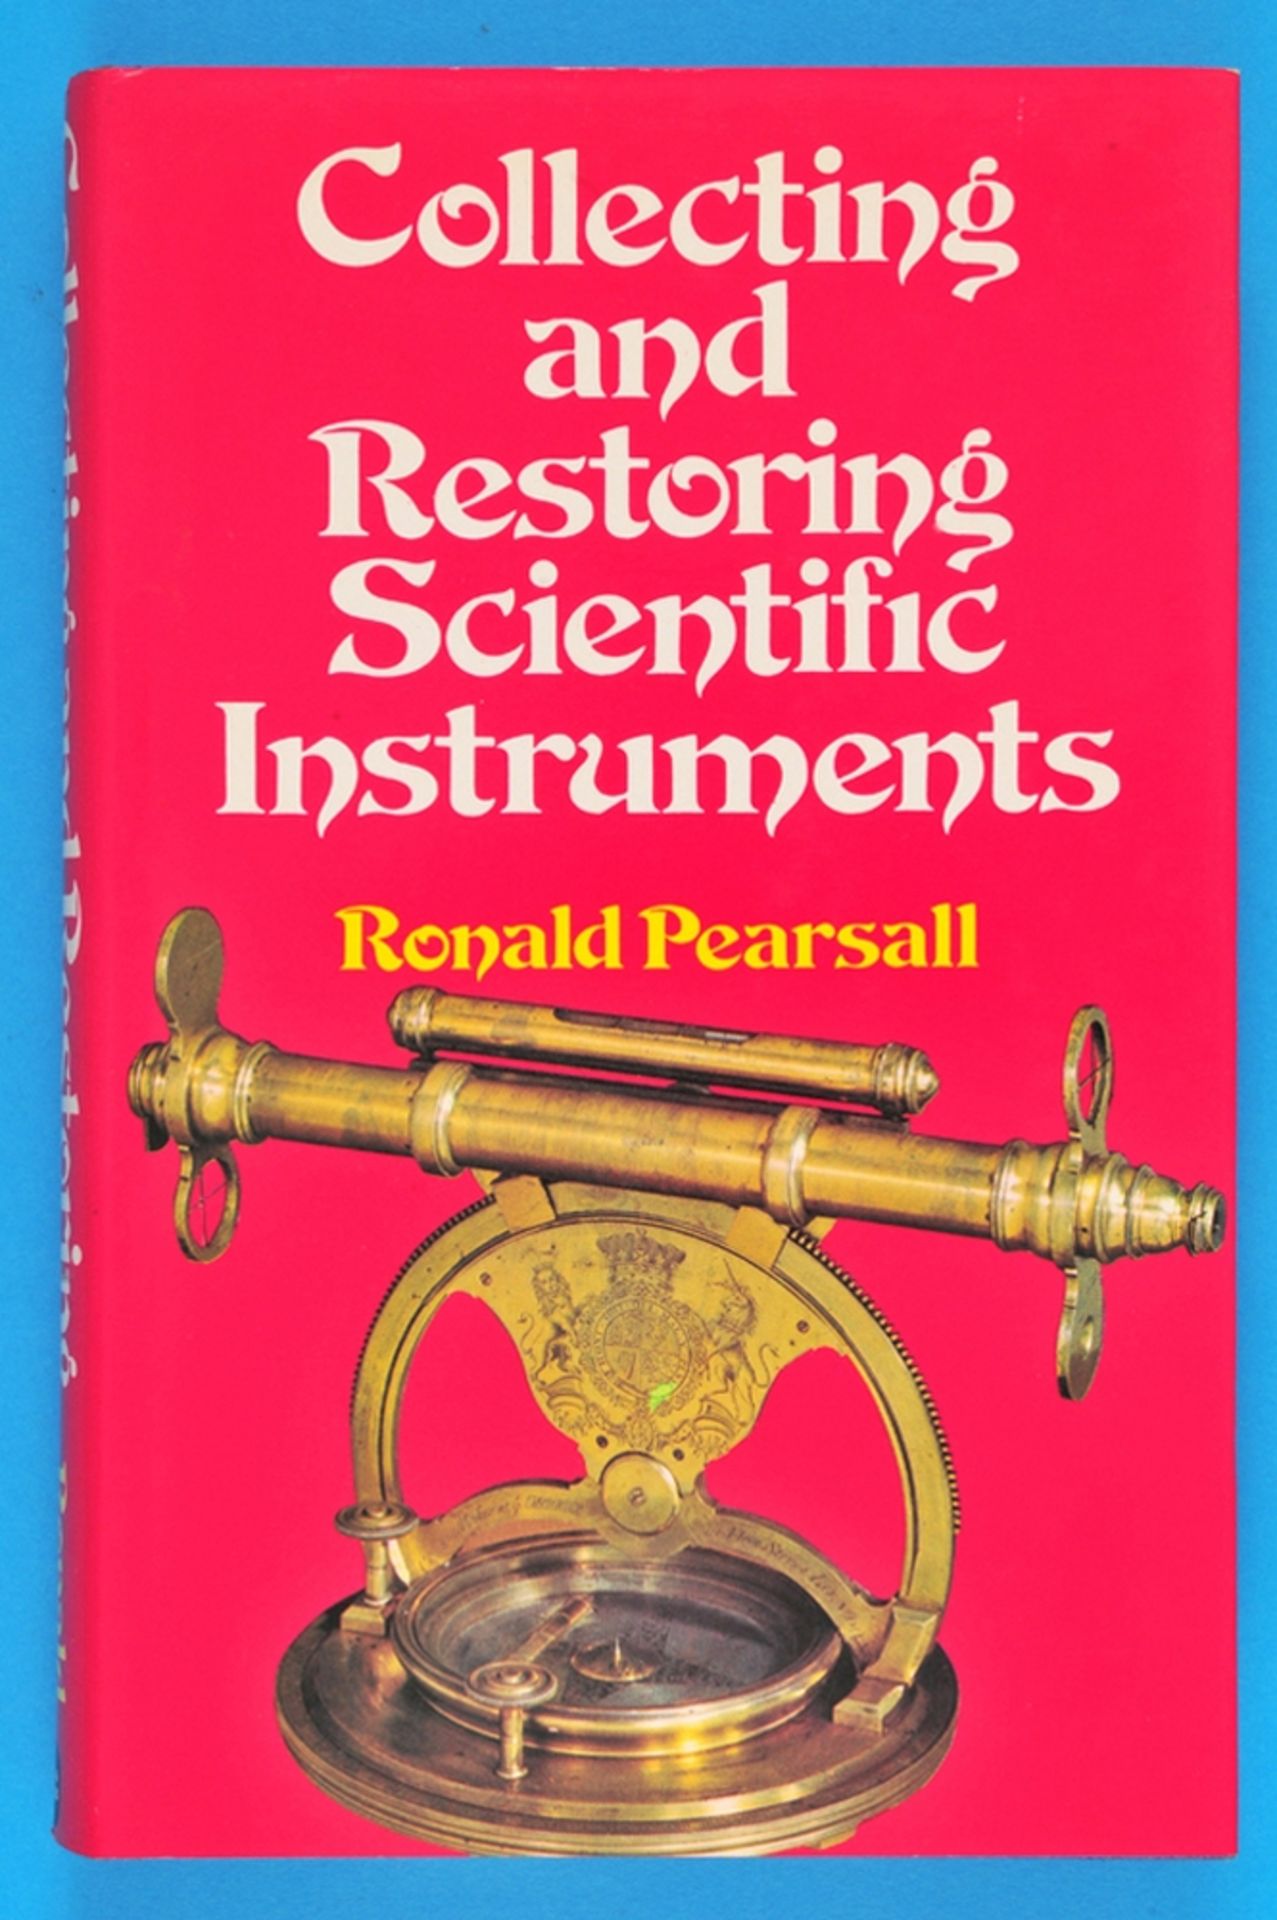 Ronald Pearsall, Collecting and Restauring Scientific Instruments, 1974